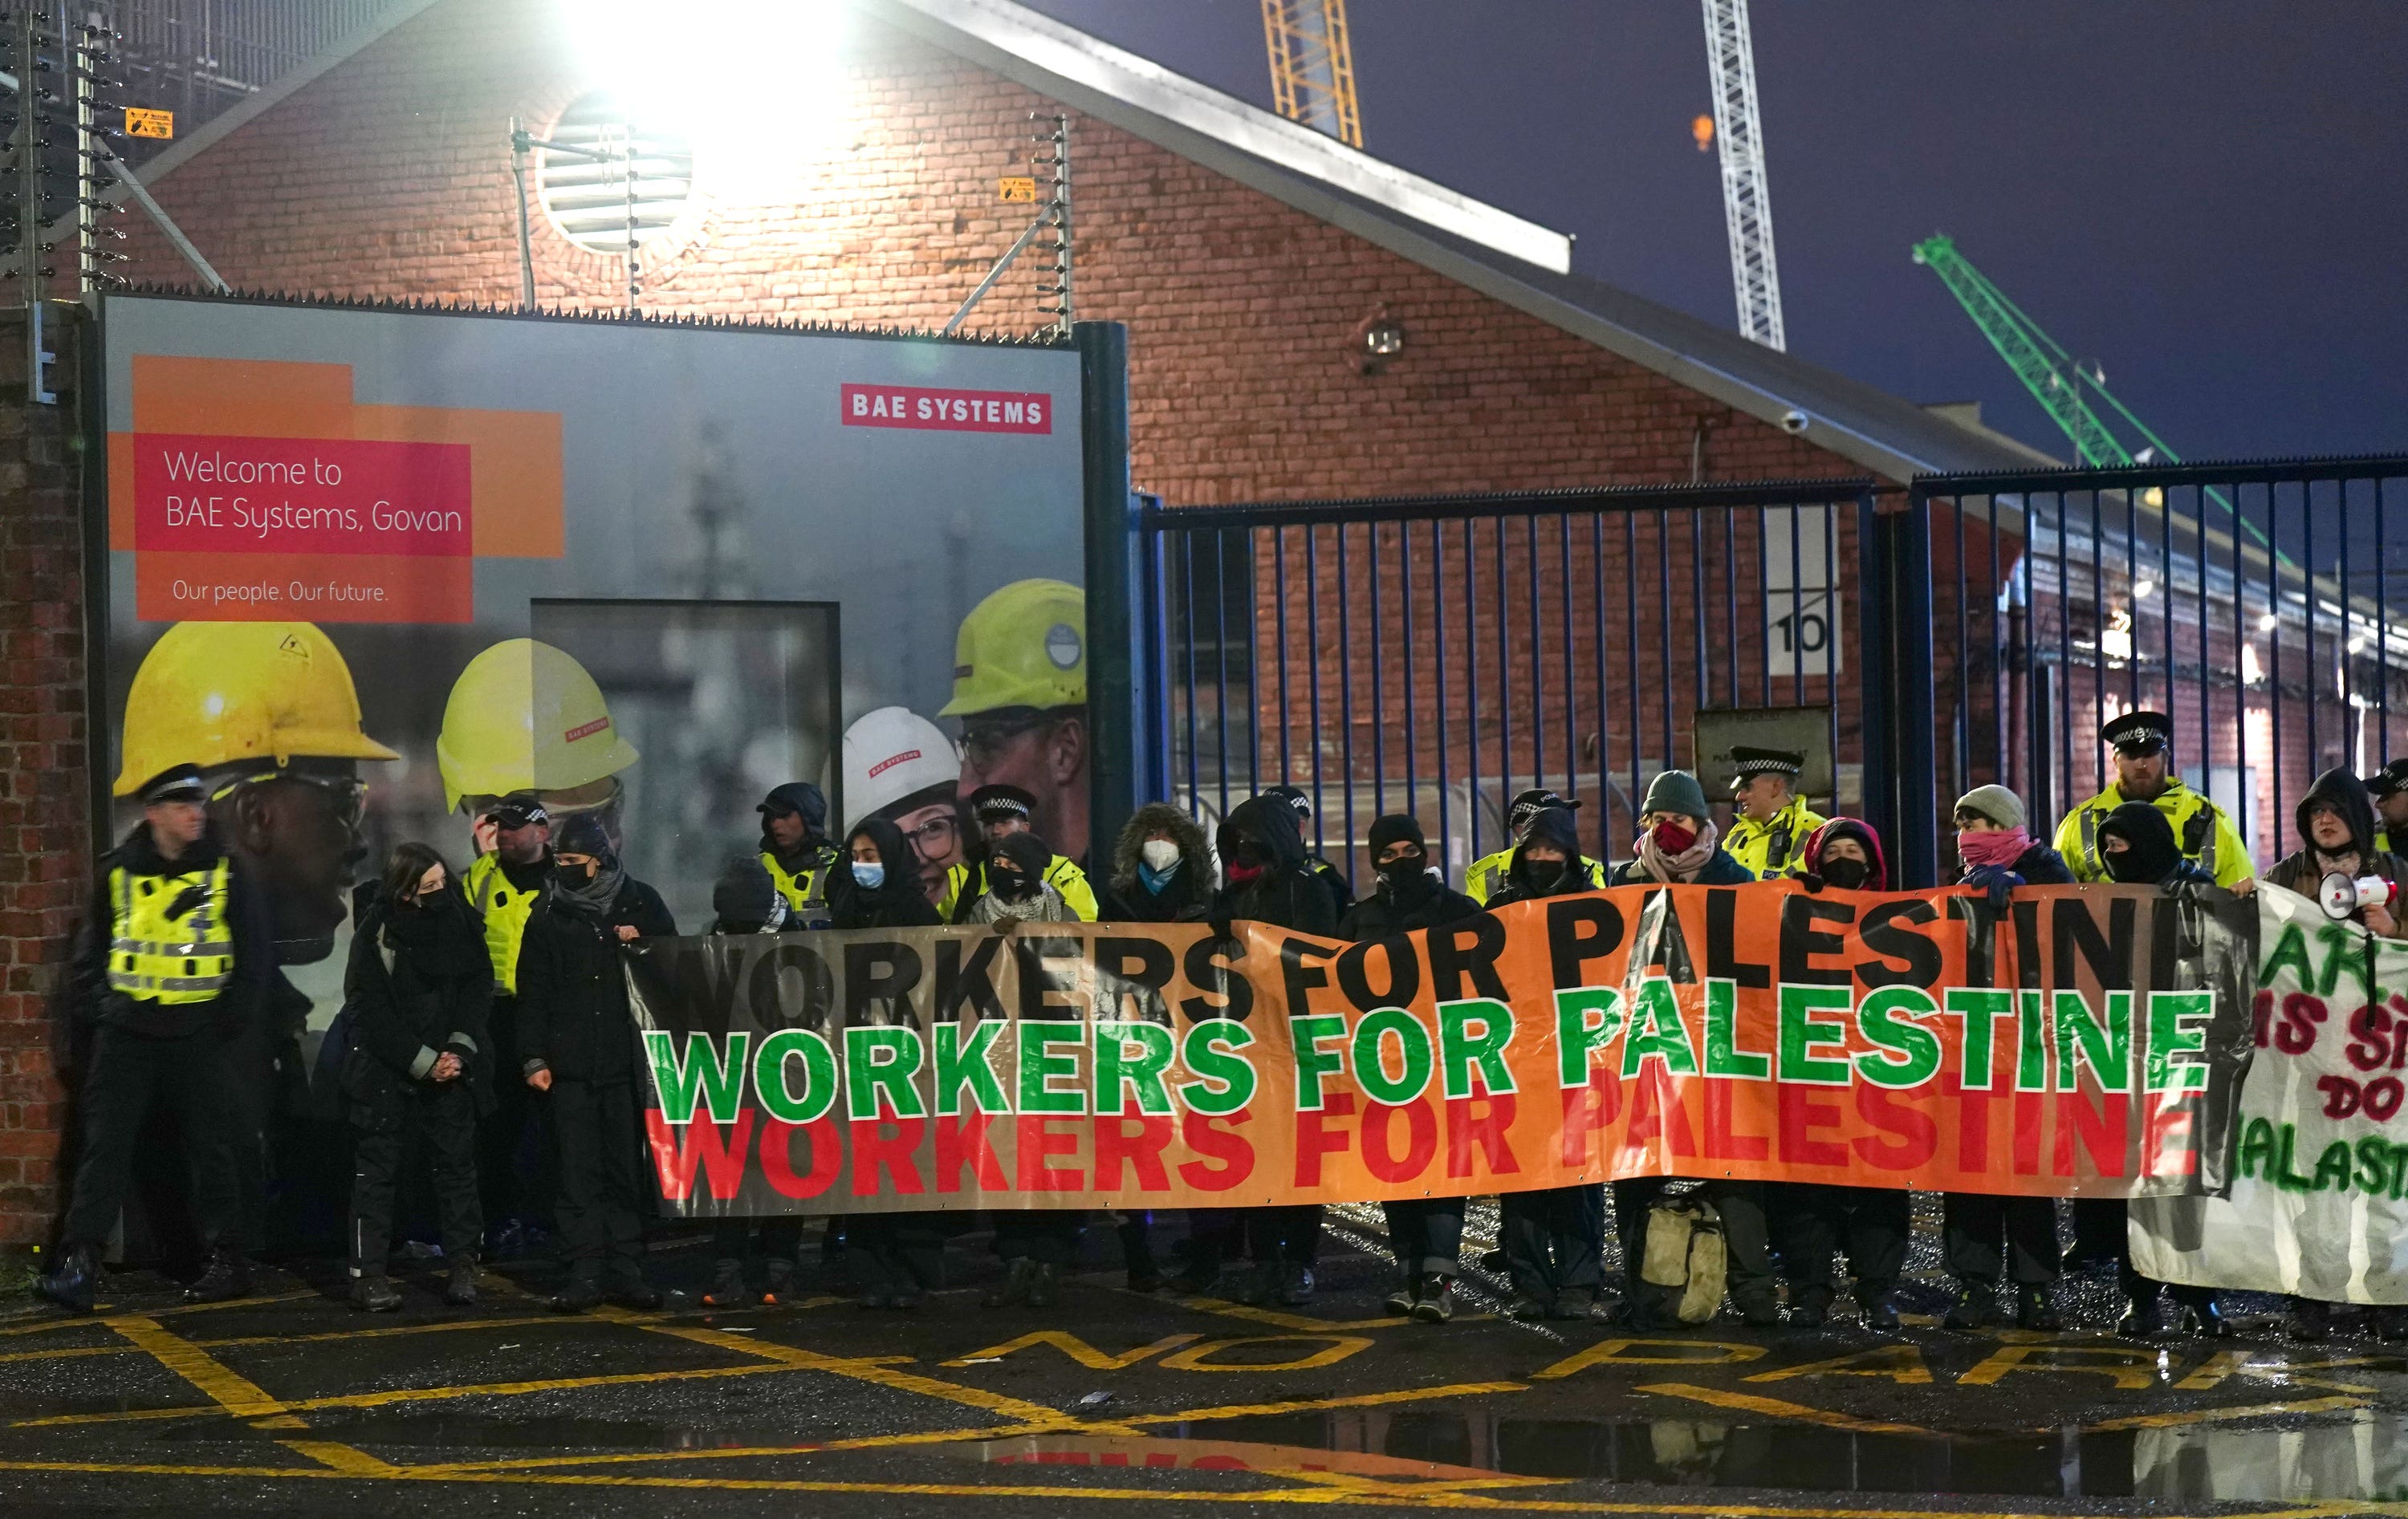 Protesters form a blockade outside BAE Systems in the Govan area.